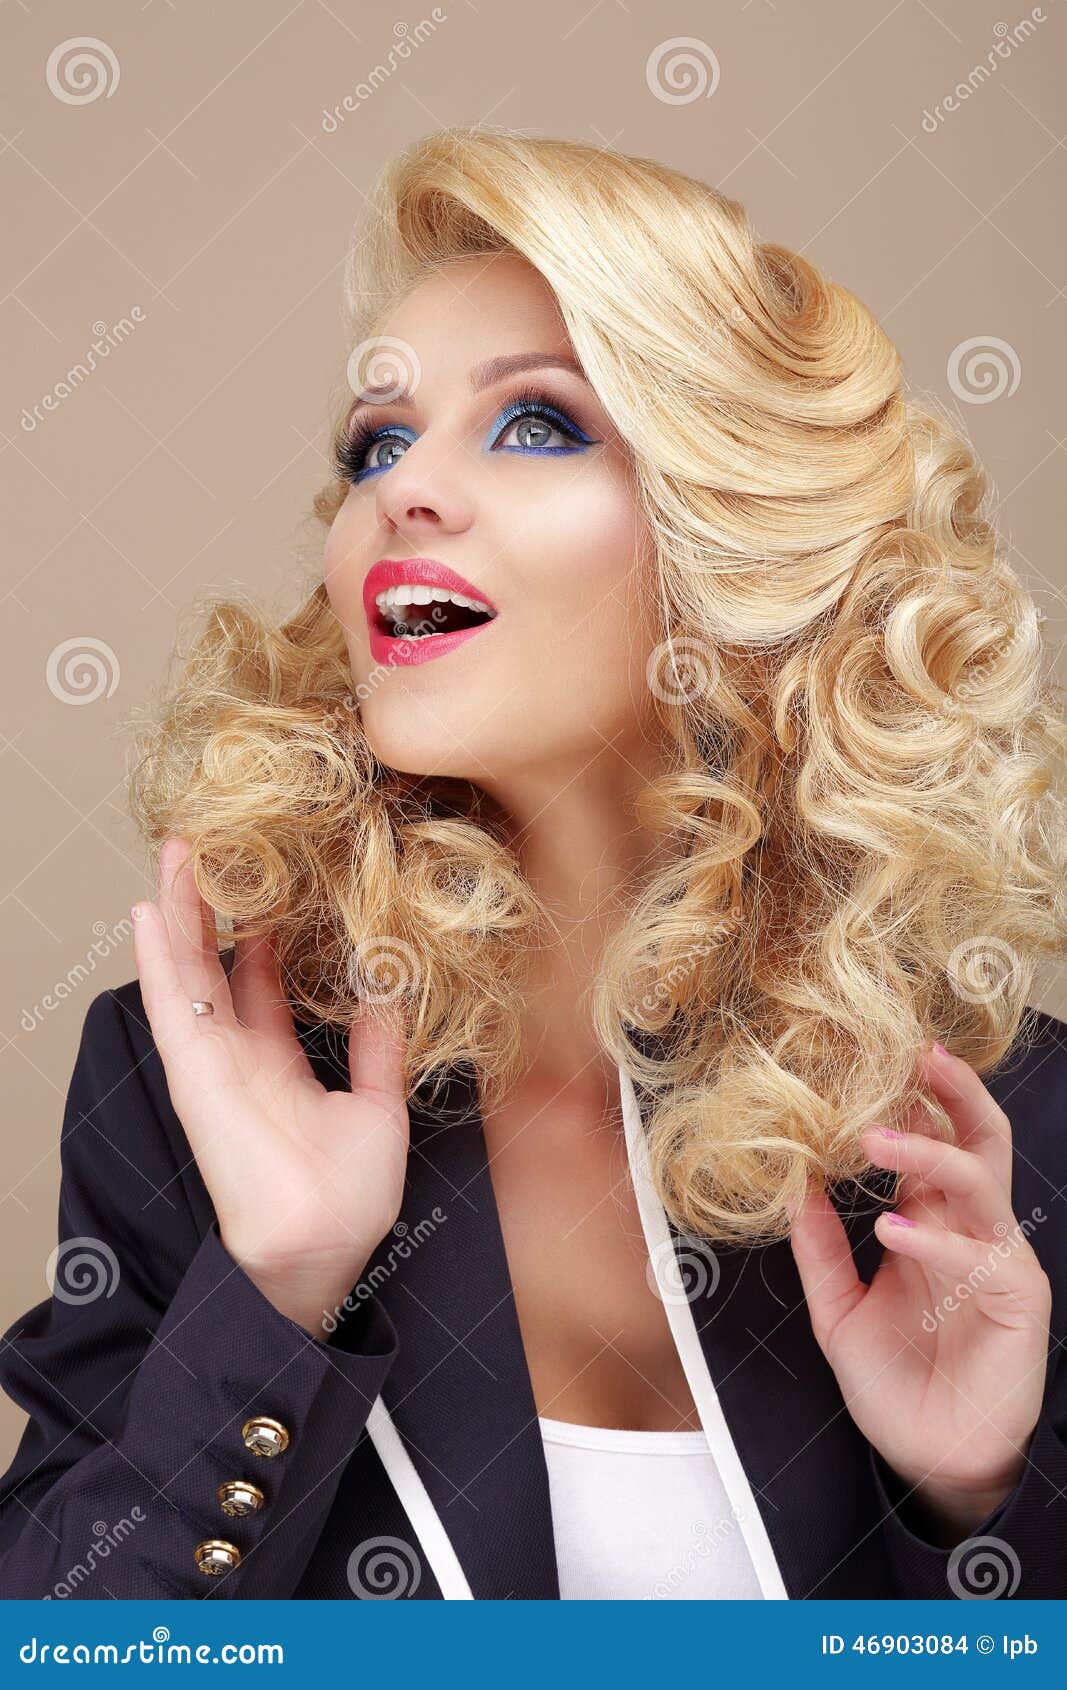 astonishment. surprised blond woman looking up